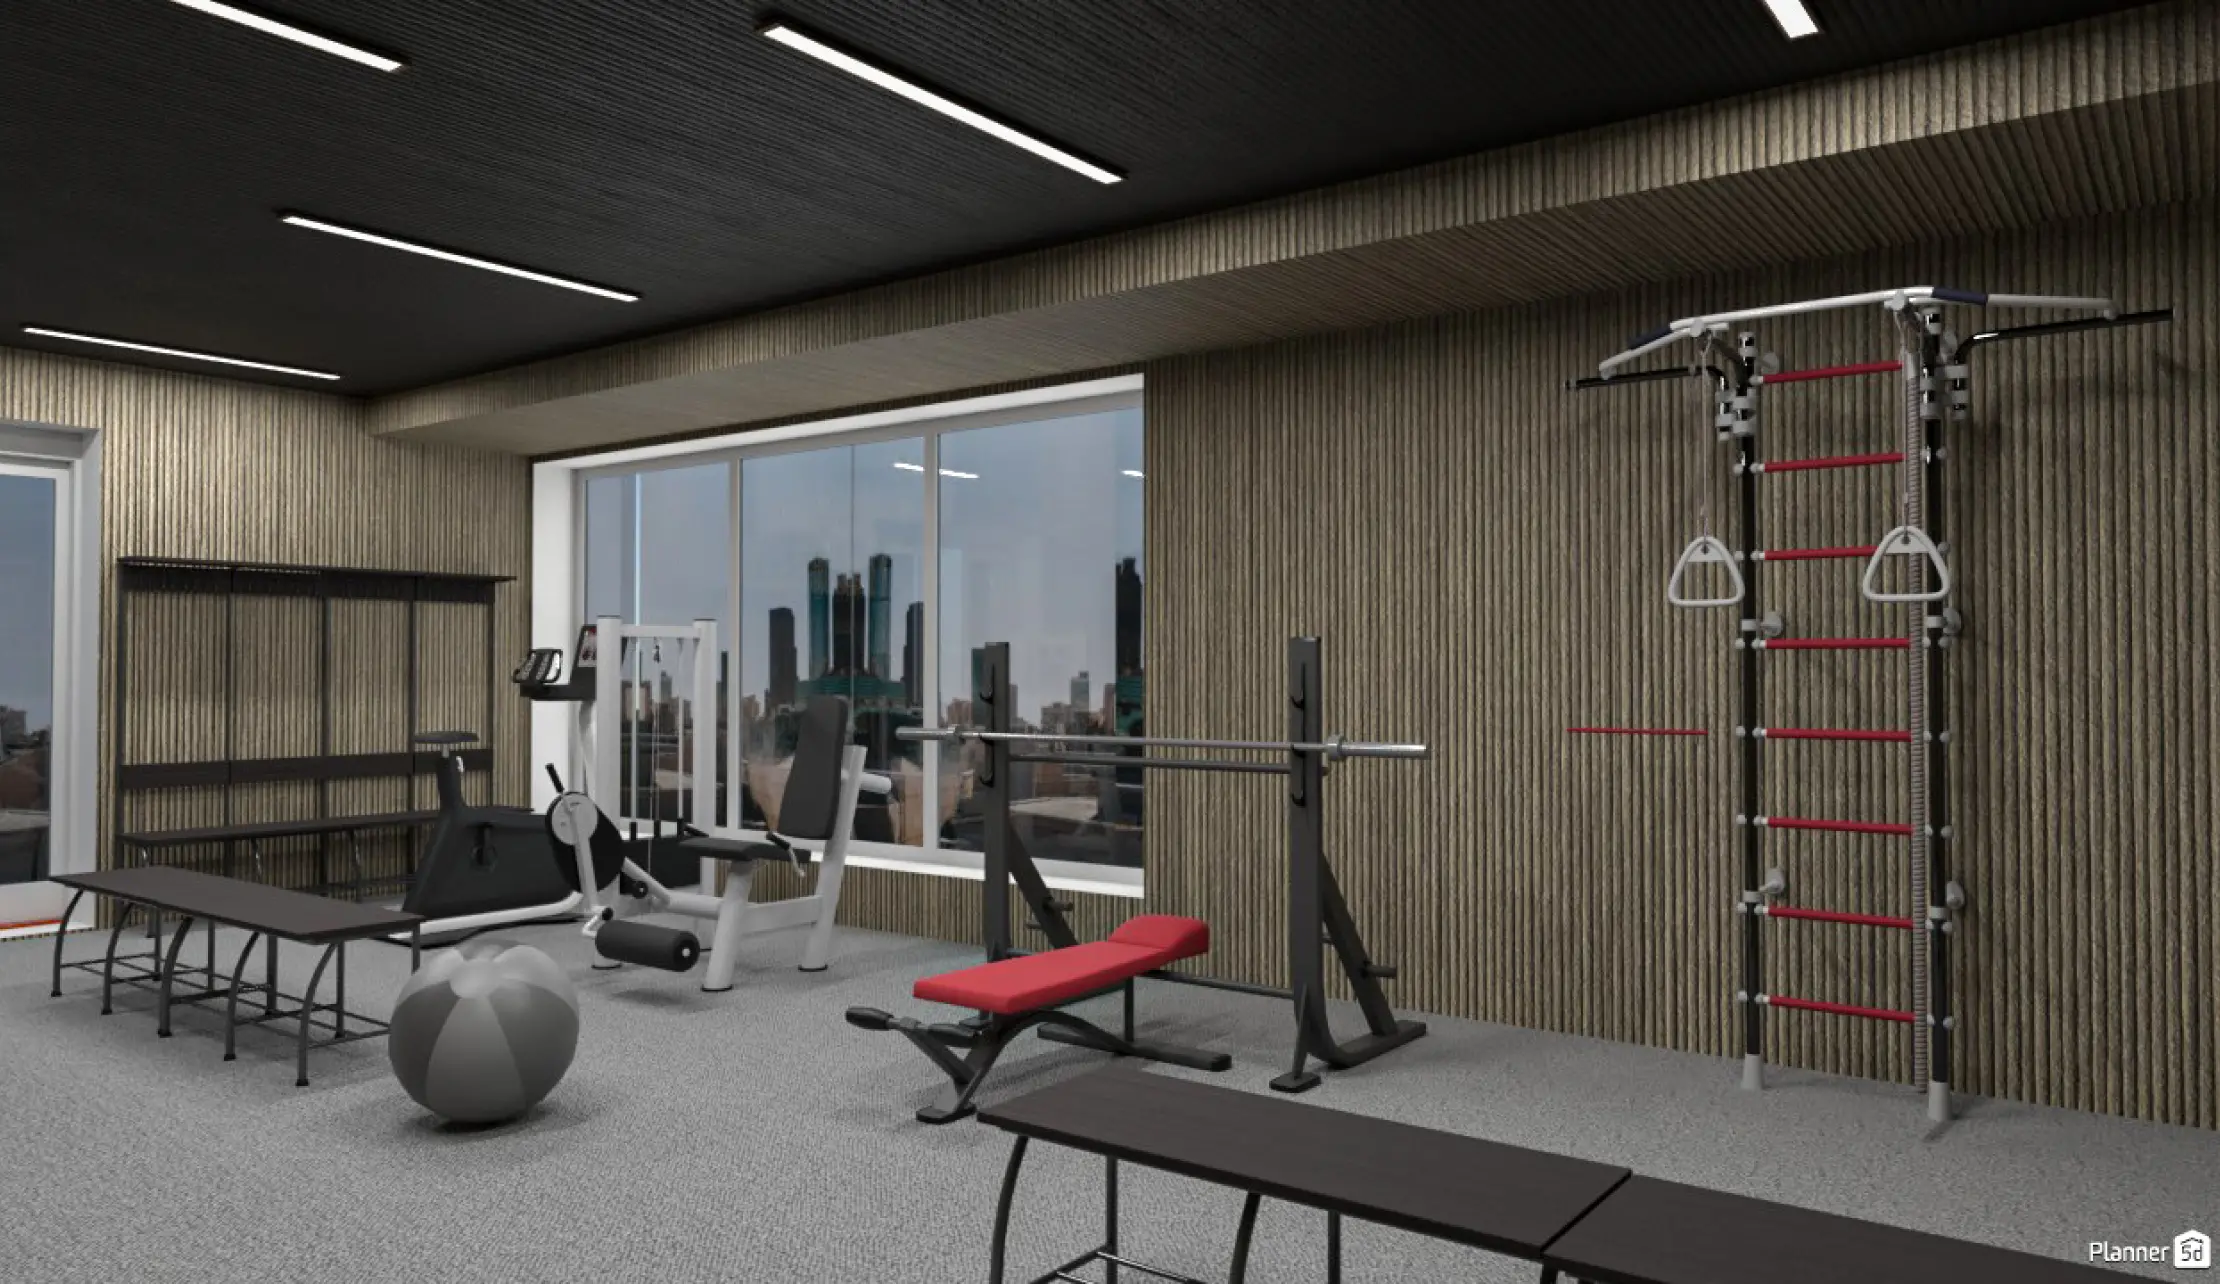 It's not your imagination — new gyms and fitness centers are